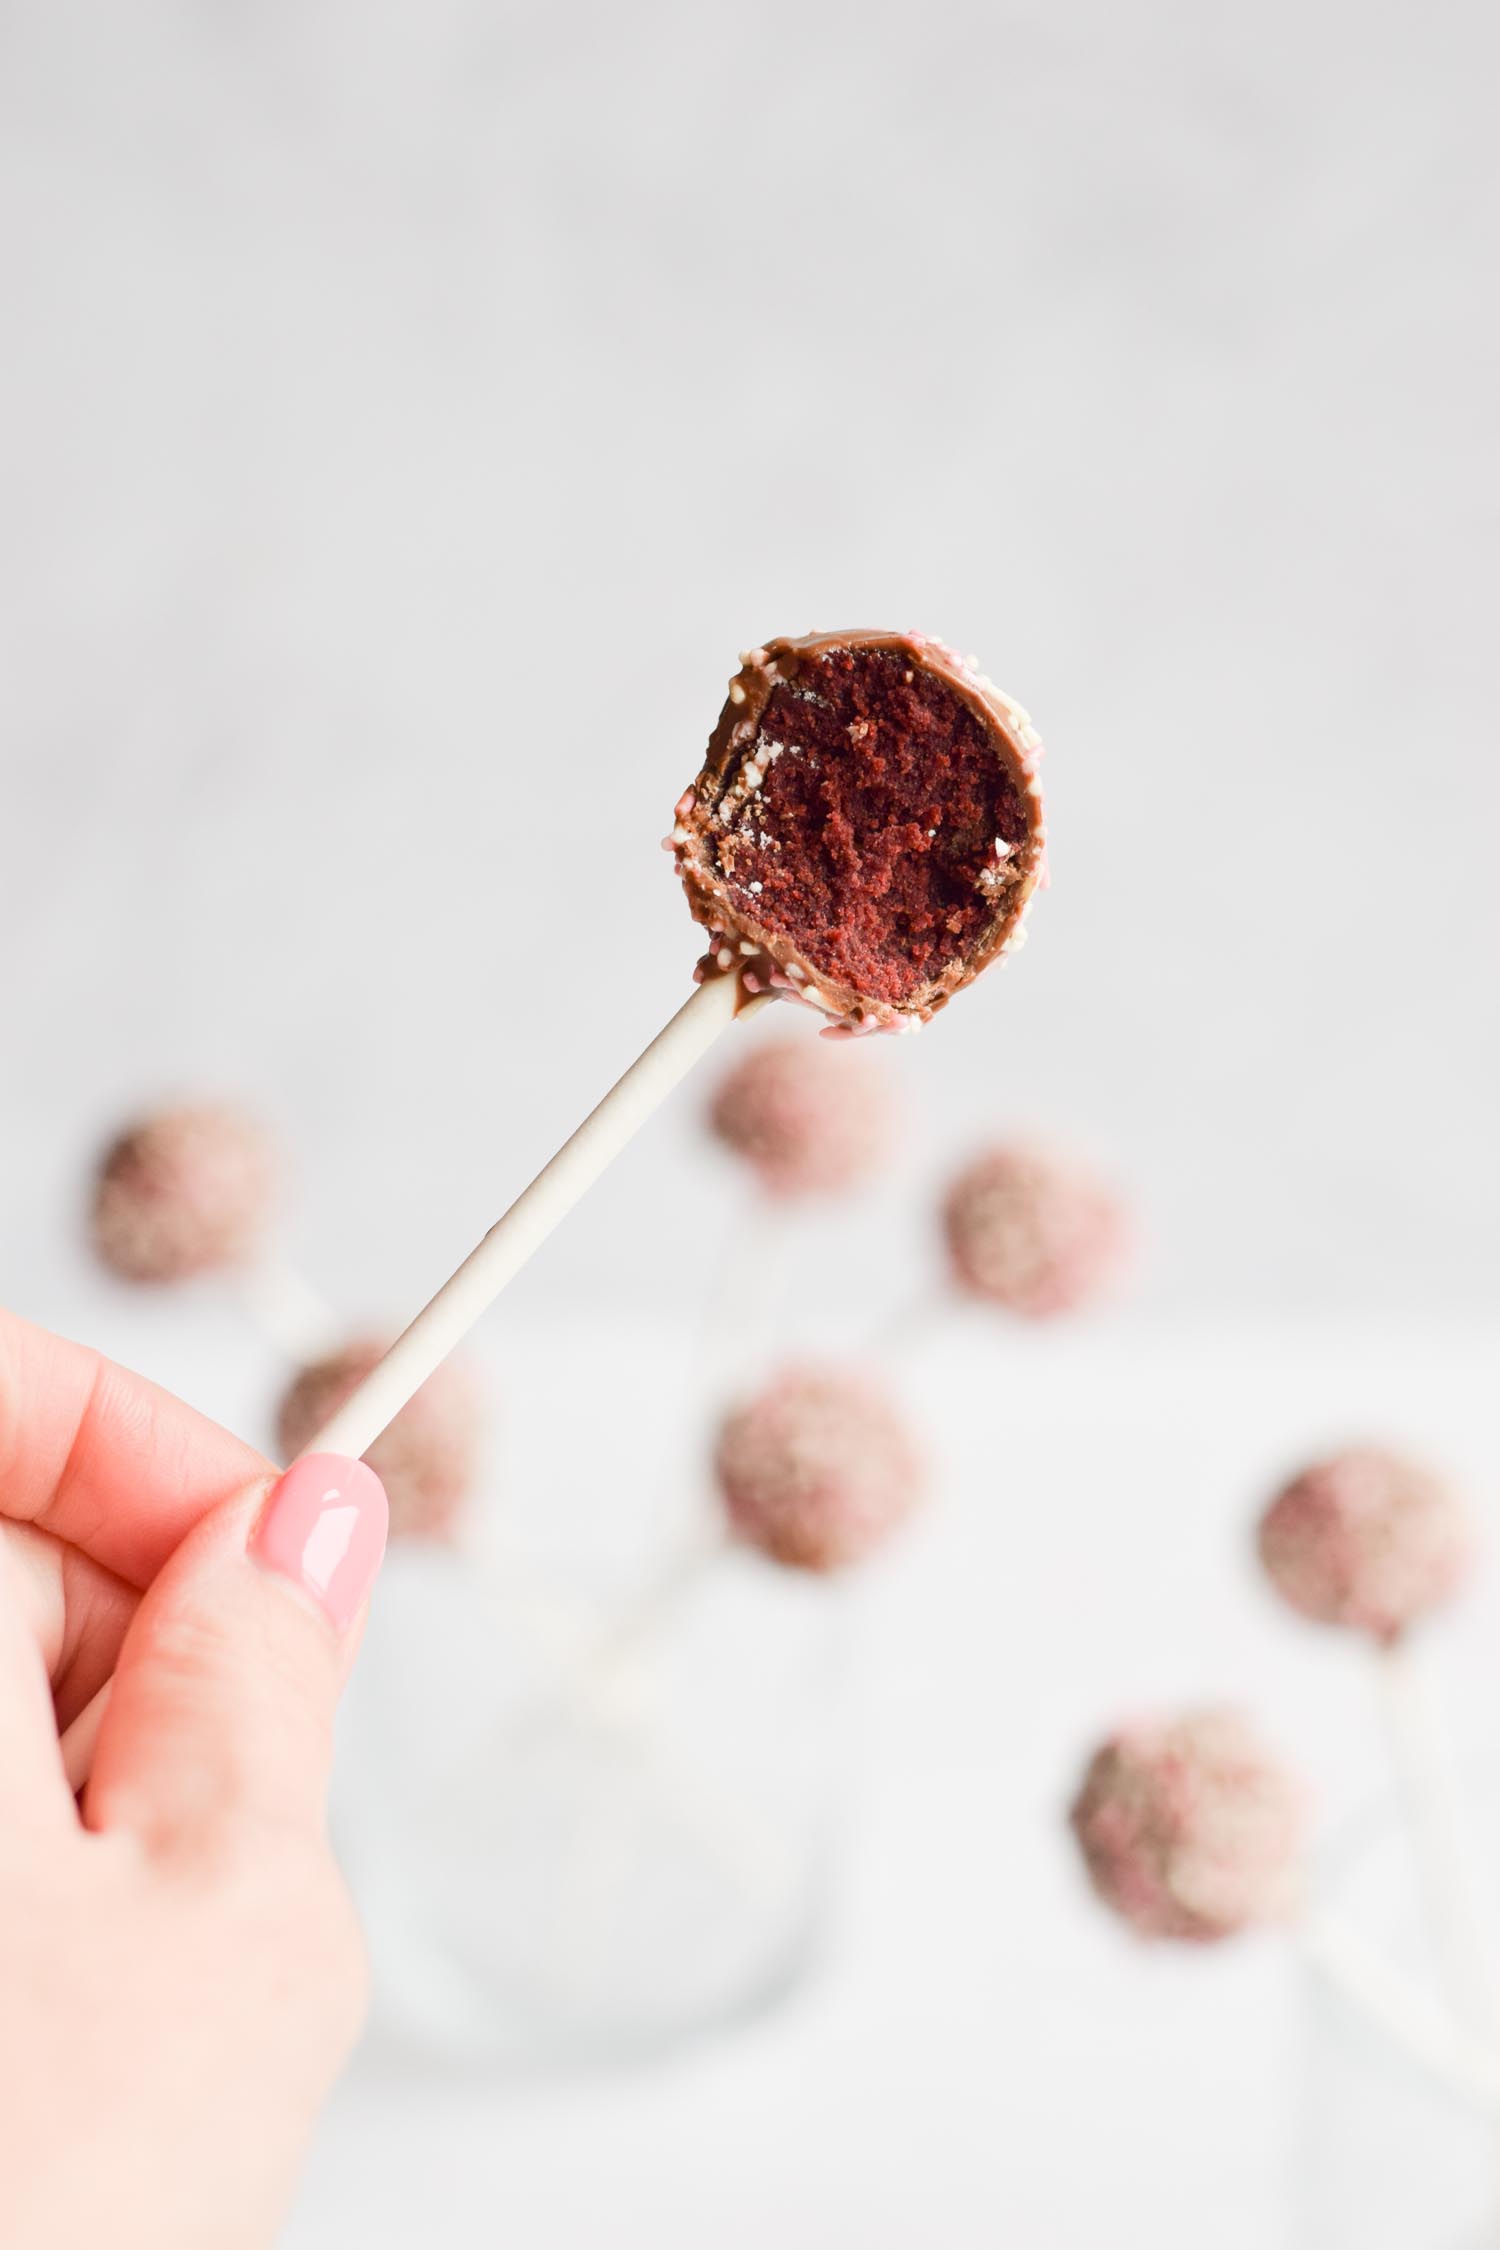 A gluten-free cake pop with a bite out of it